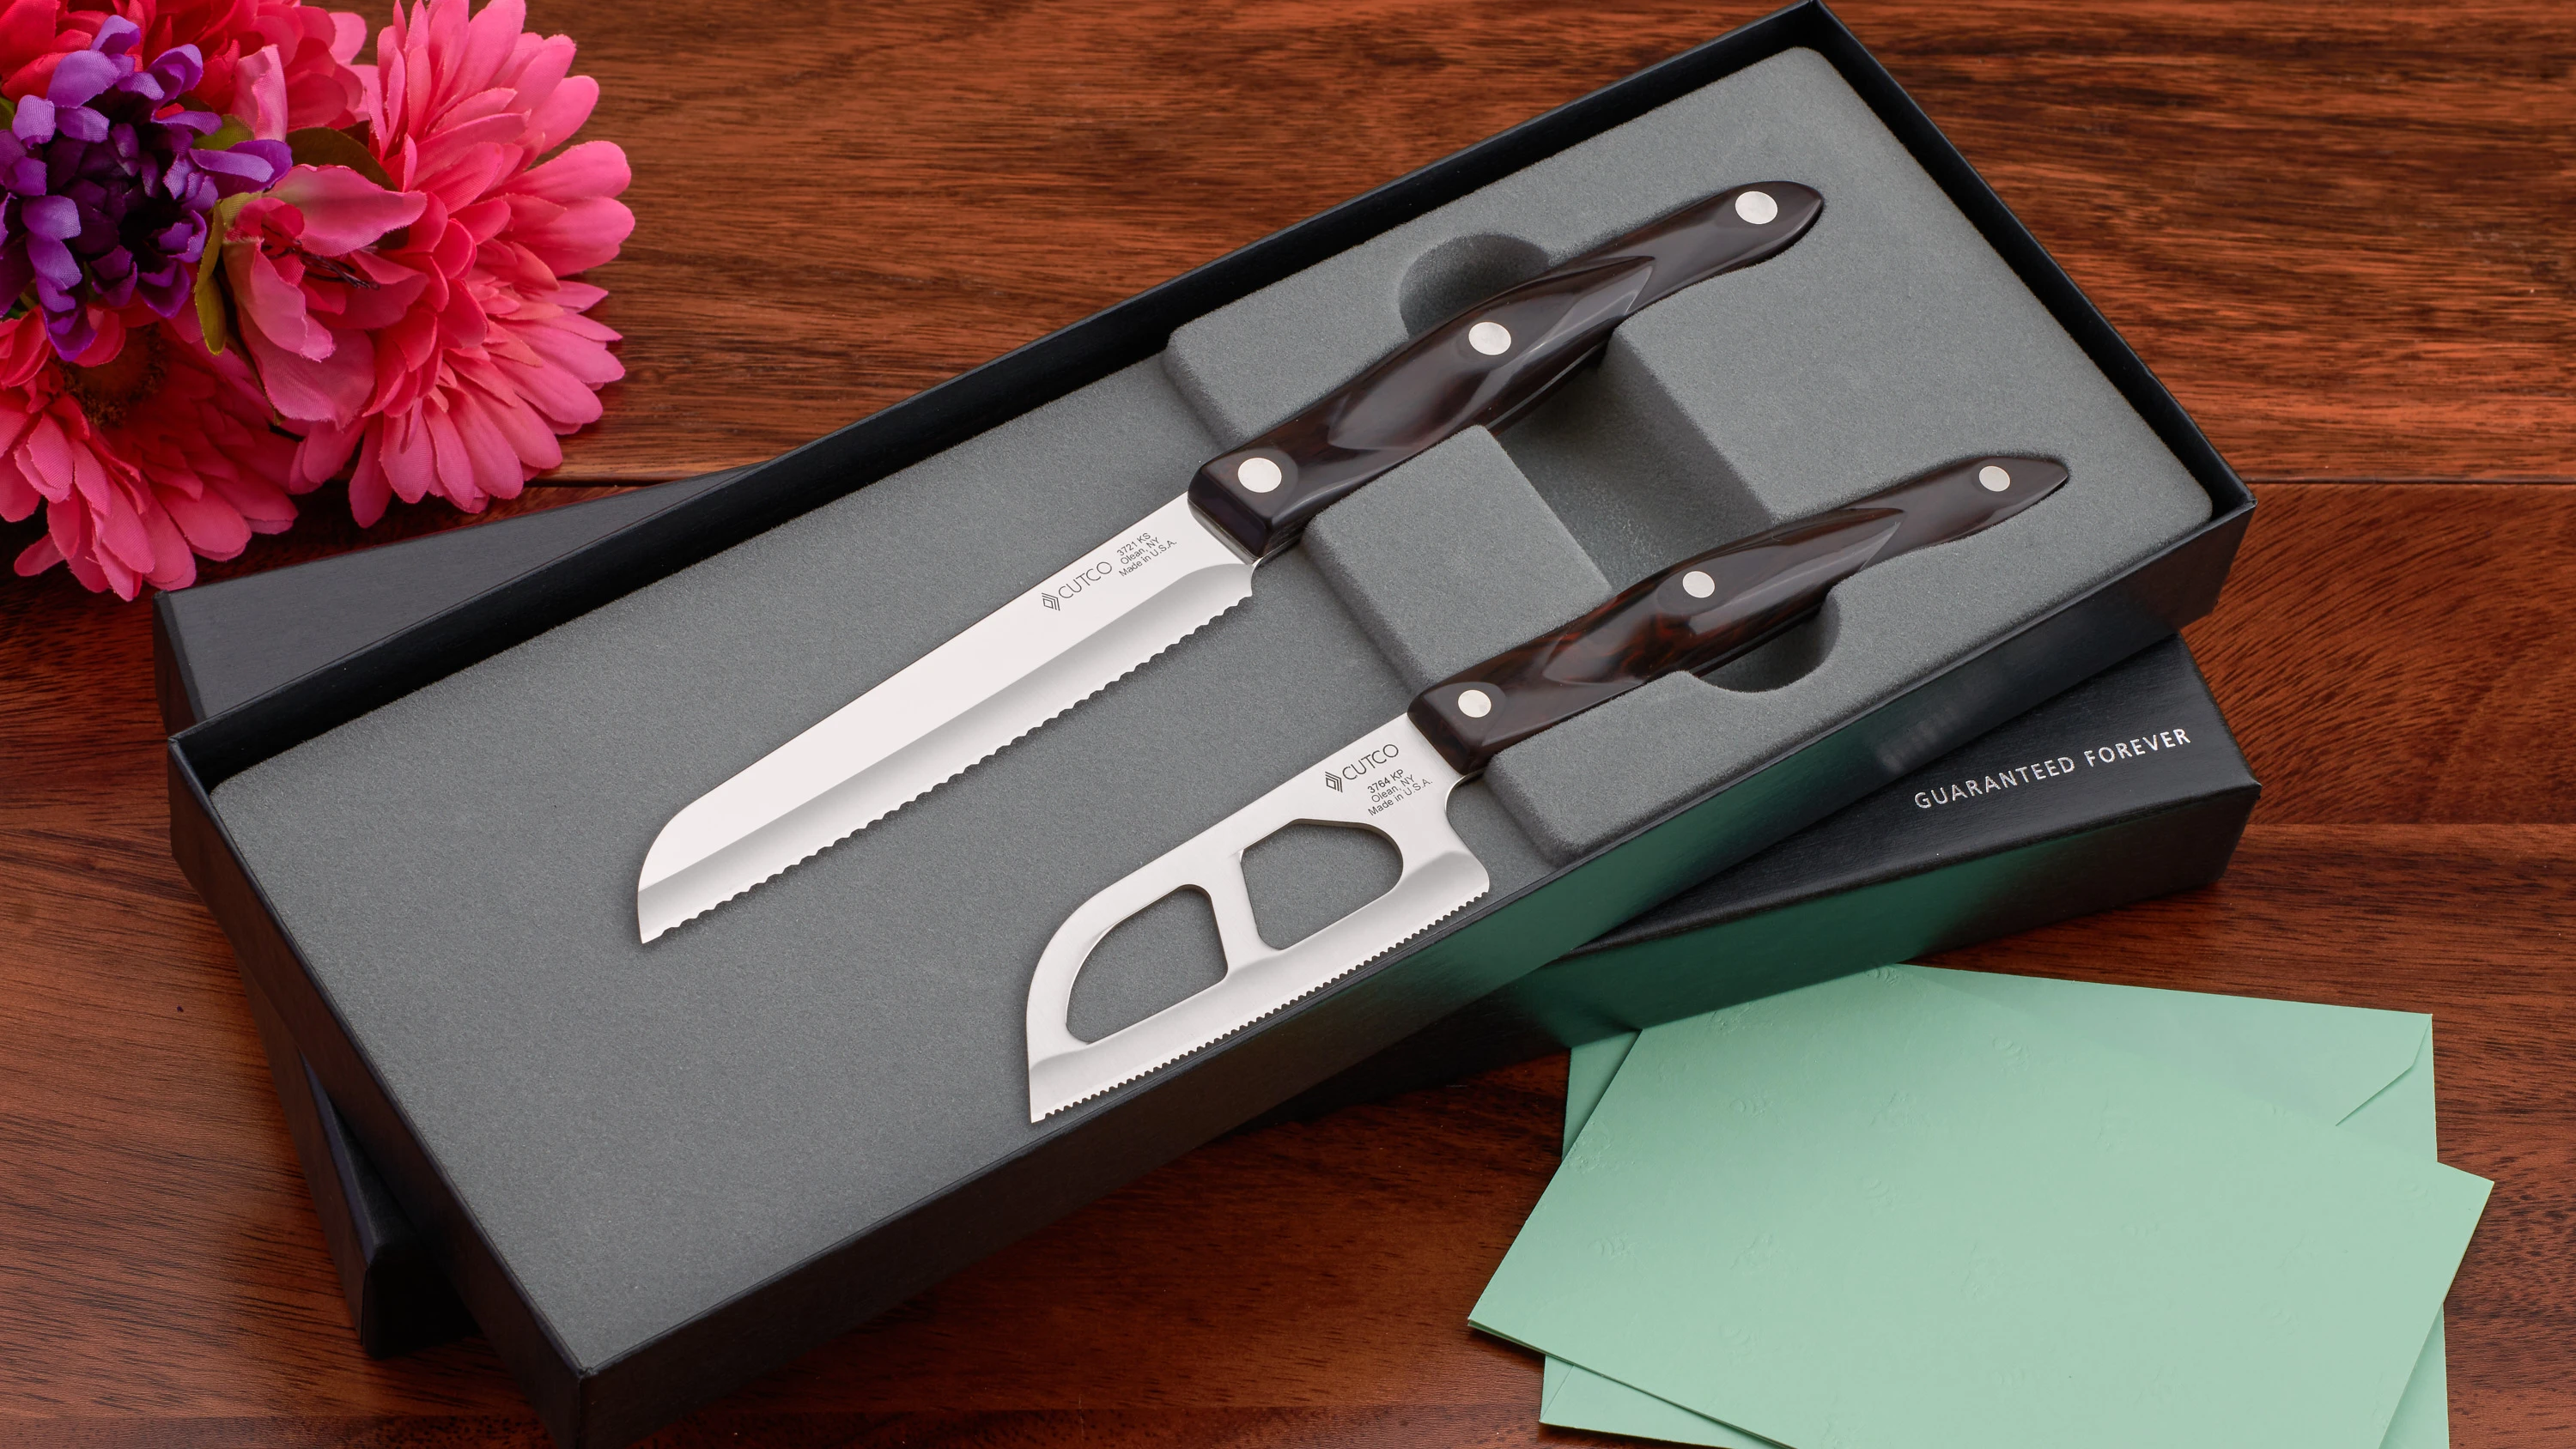 8-Pc. Table Knife Set  Gift-Boxed Sets by Cutco